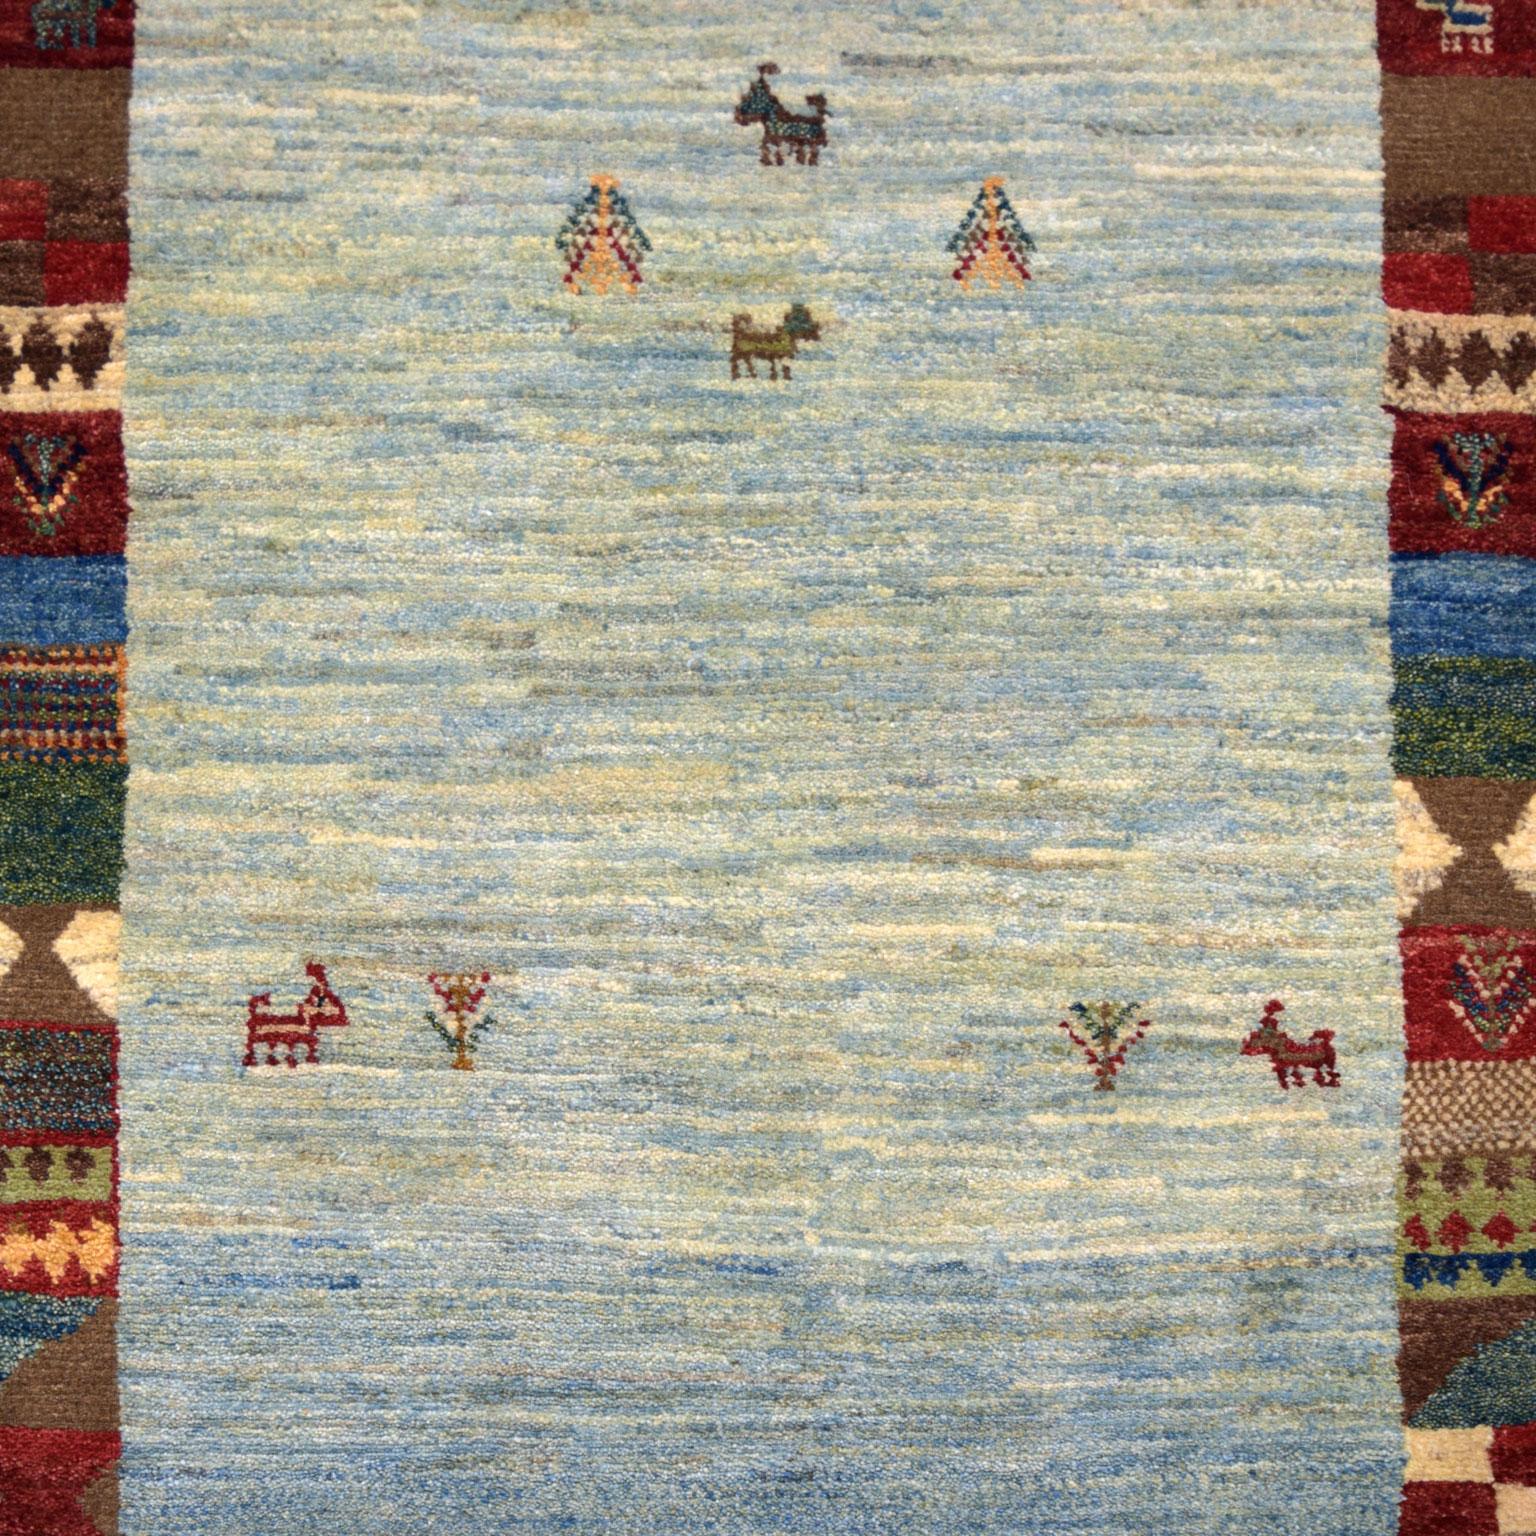 Woven in Iran, this Persian carpet measures 2’8” x 4’4” and is part of Orley Shabahang’s World Market Collection. To construct this carpet, the weaver utilized a Persian weaving technique. This hand-knotting technique originates from Persia and